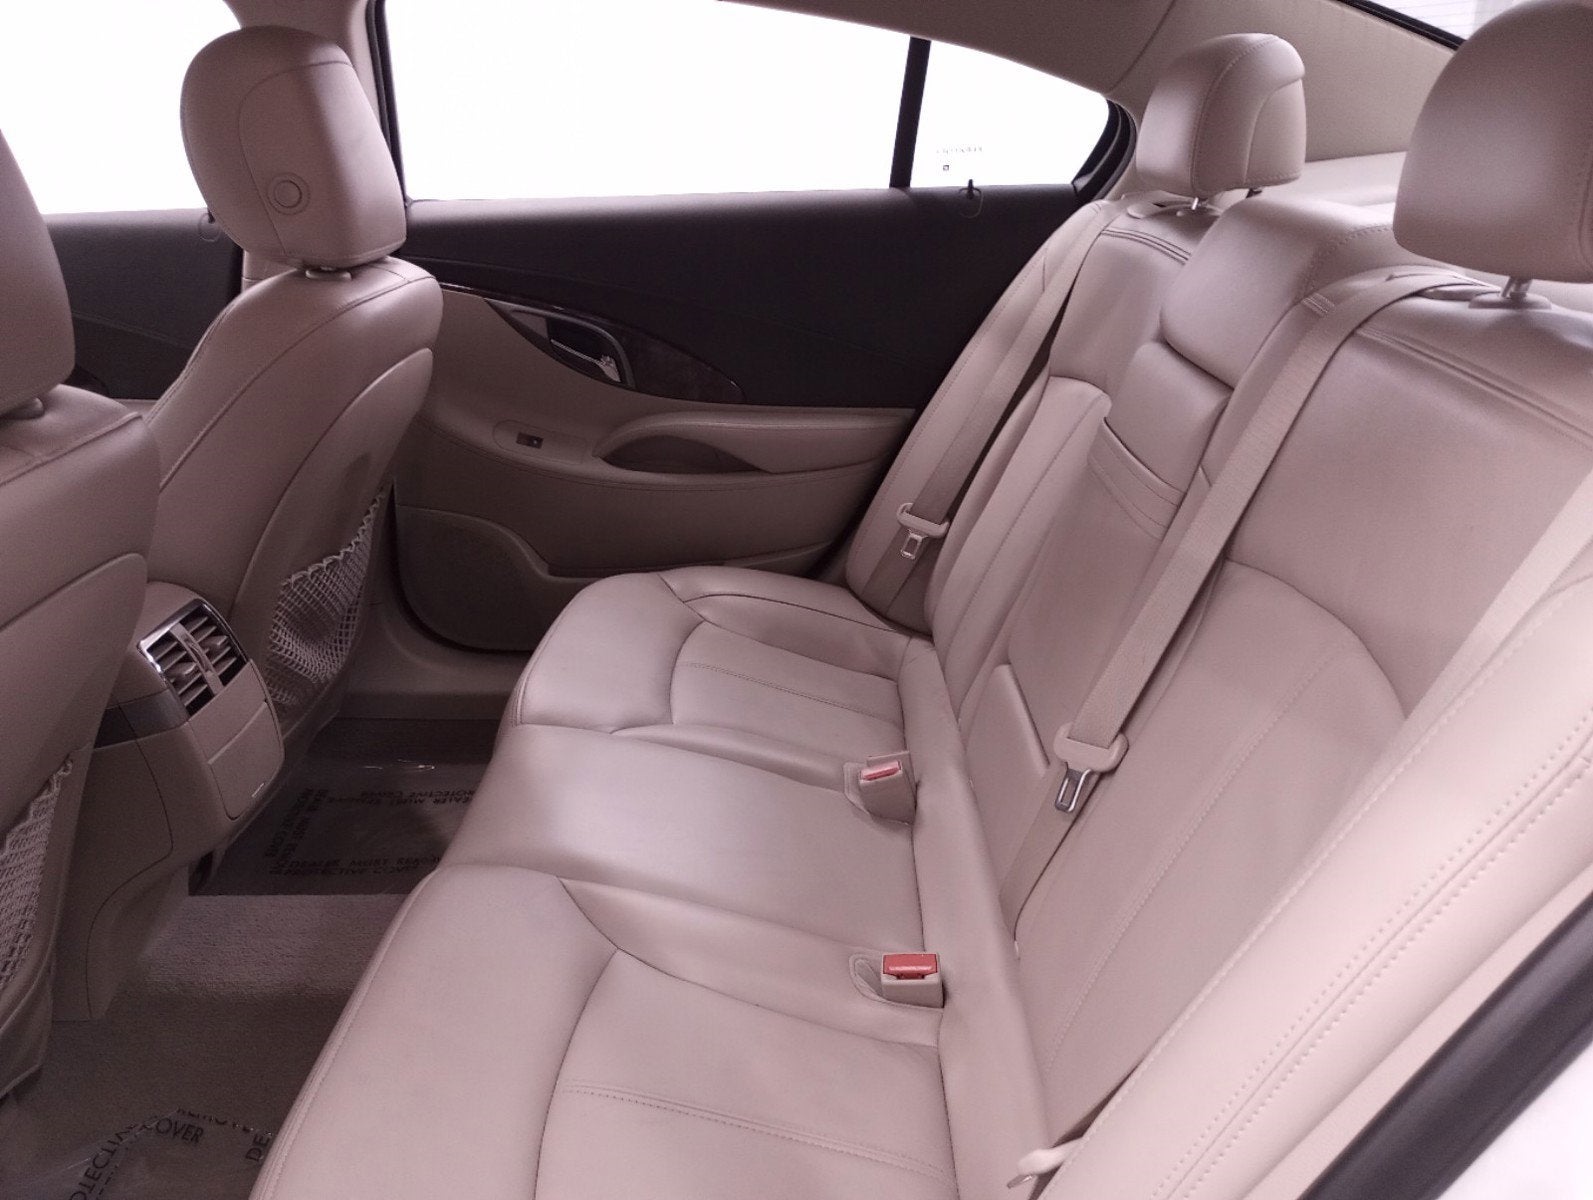 2013 Buick LaCrosse Leather